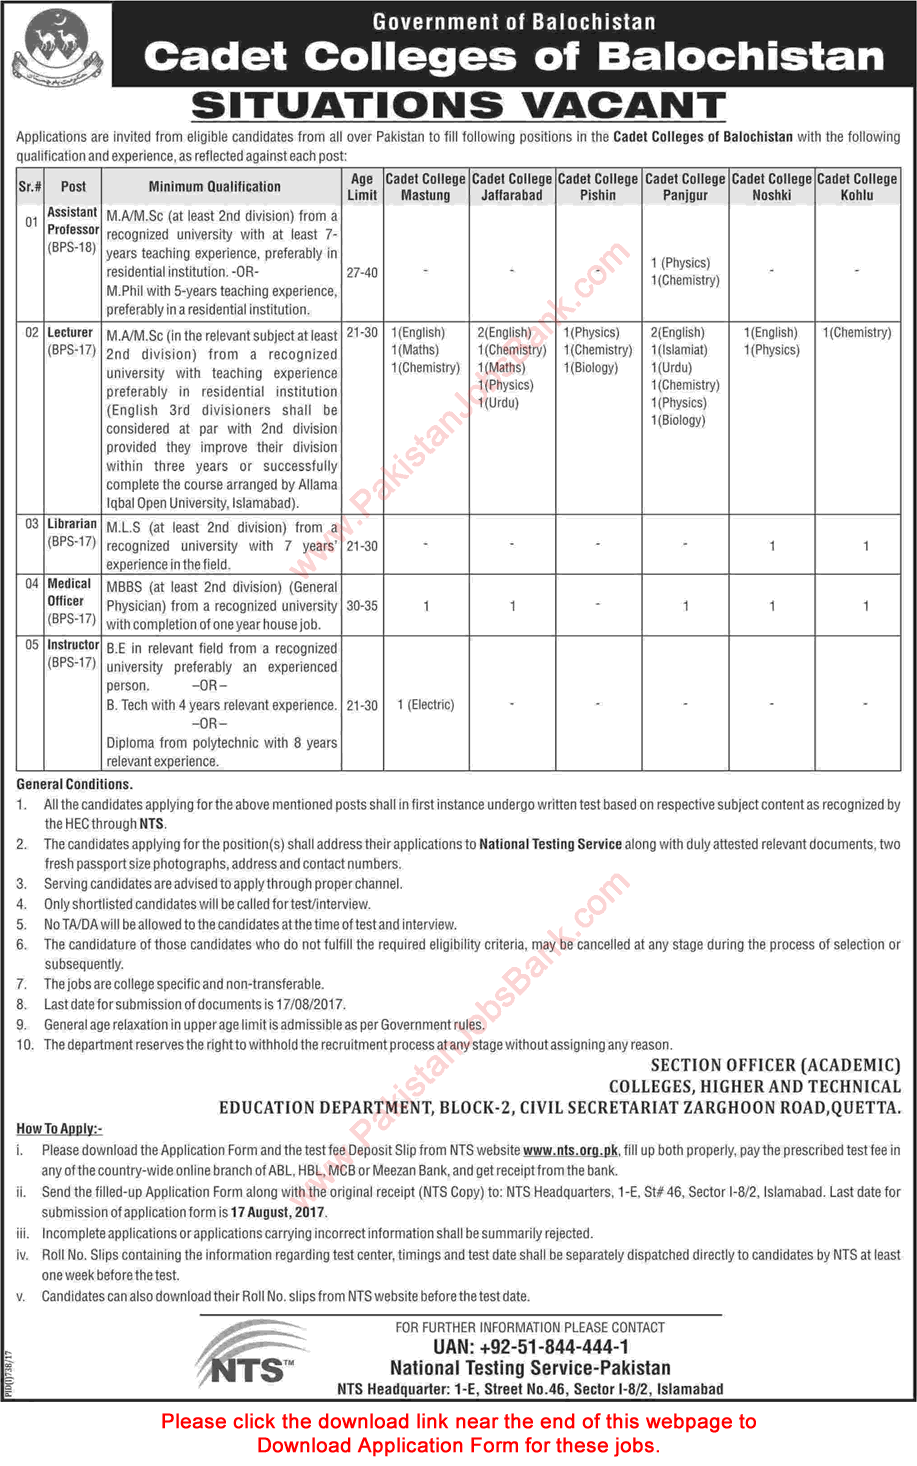 Cadet Colleges of Balochistan Jobs 2017 August NTS Application Form Teaching Faculty & Others Latest